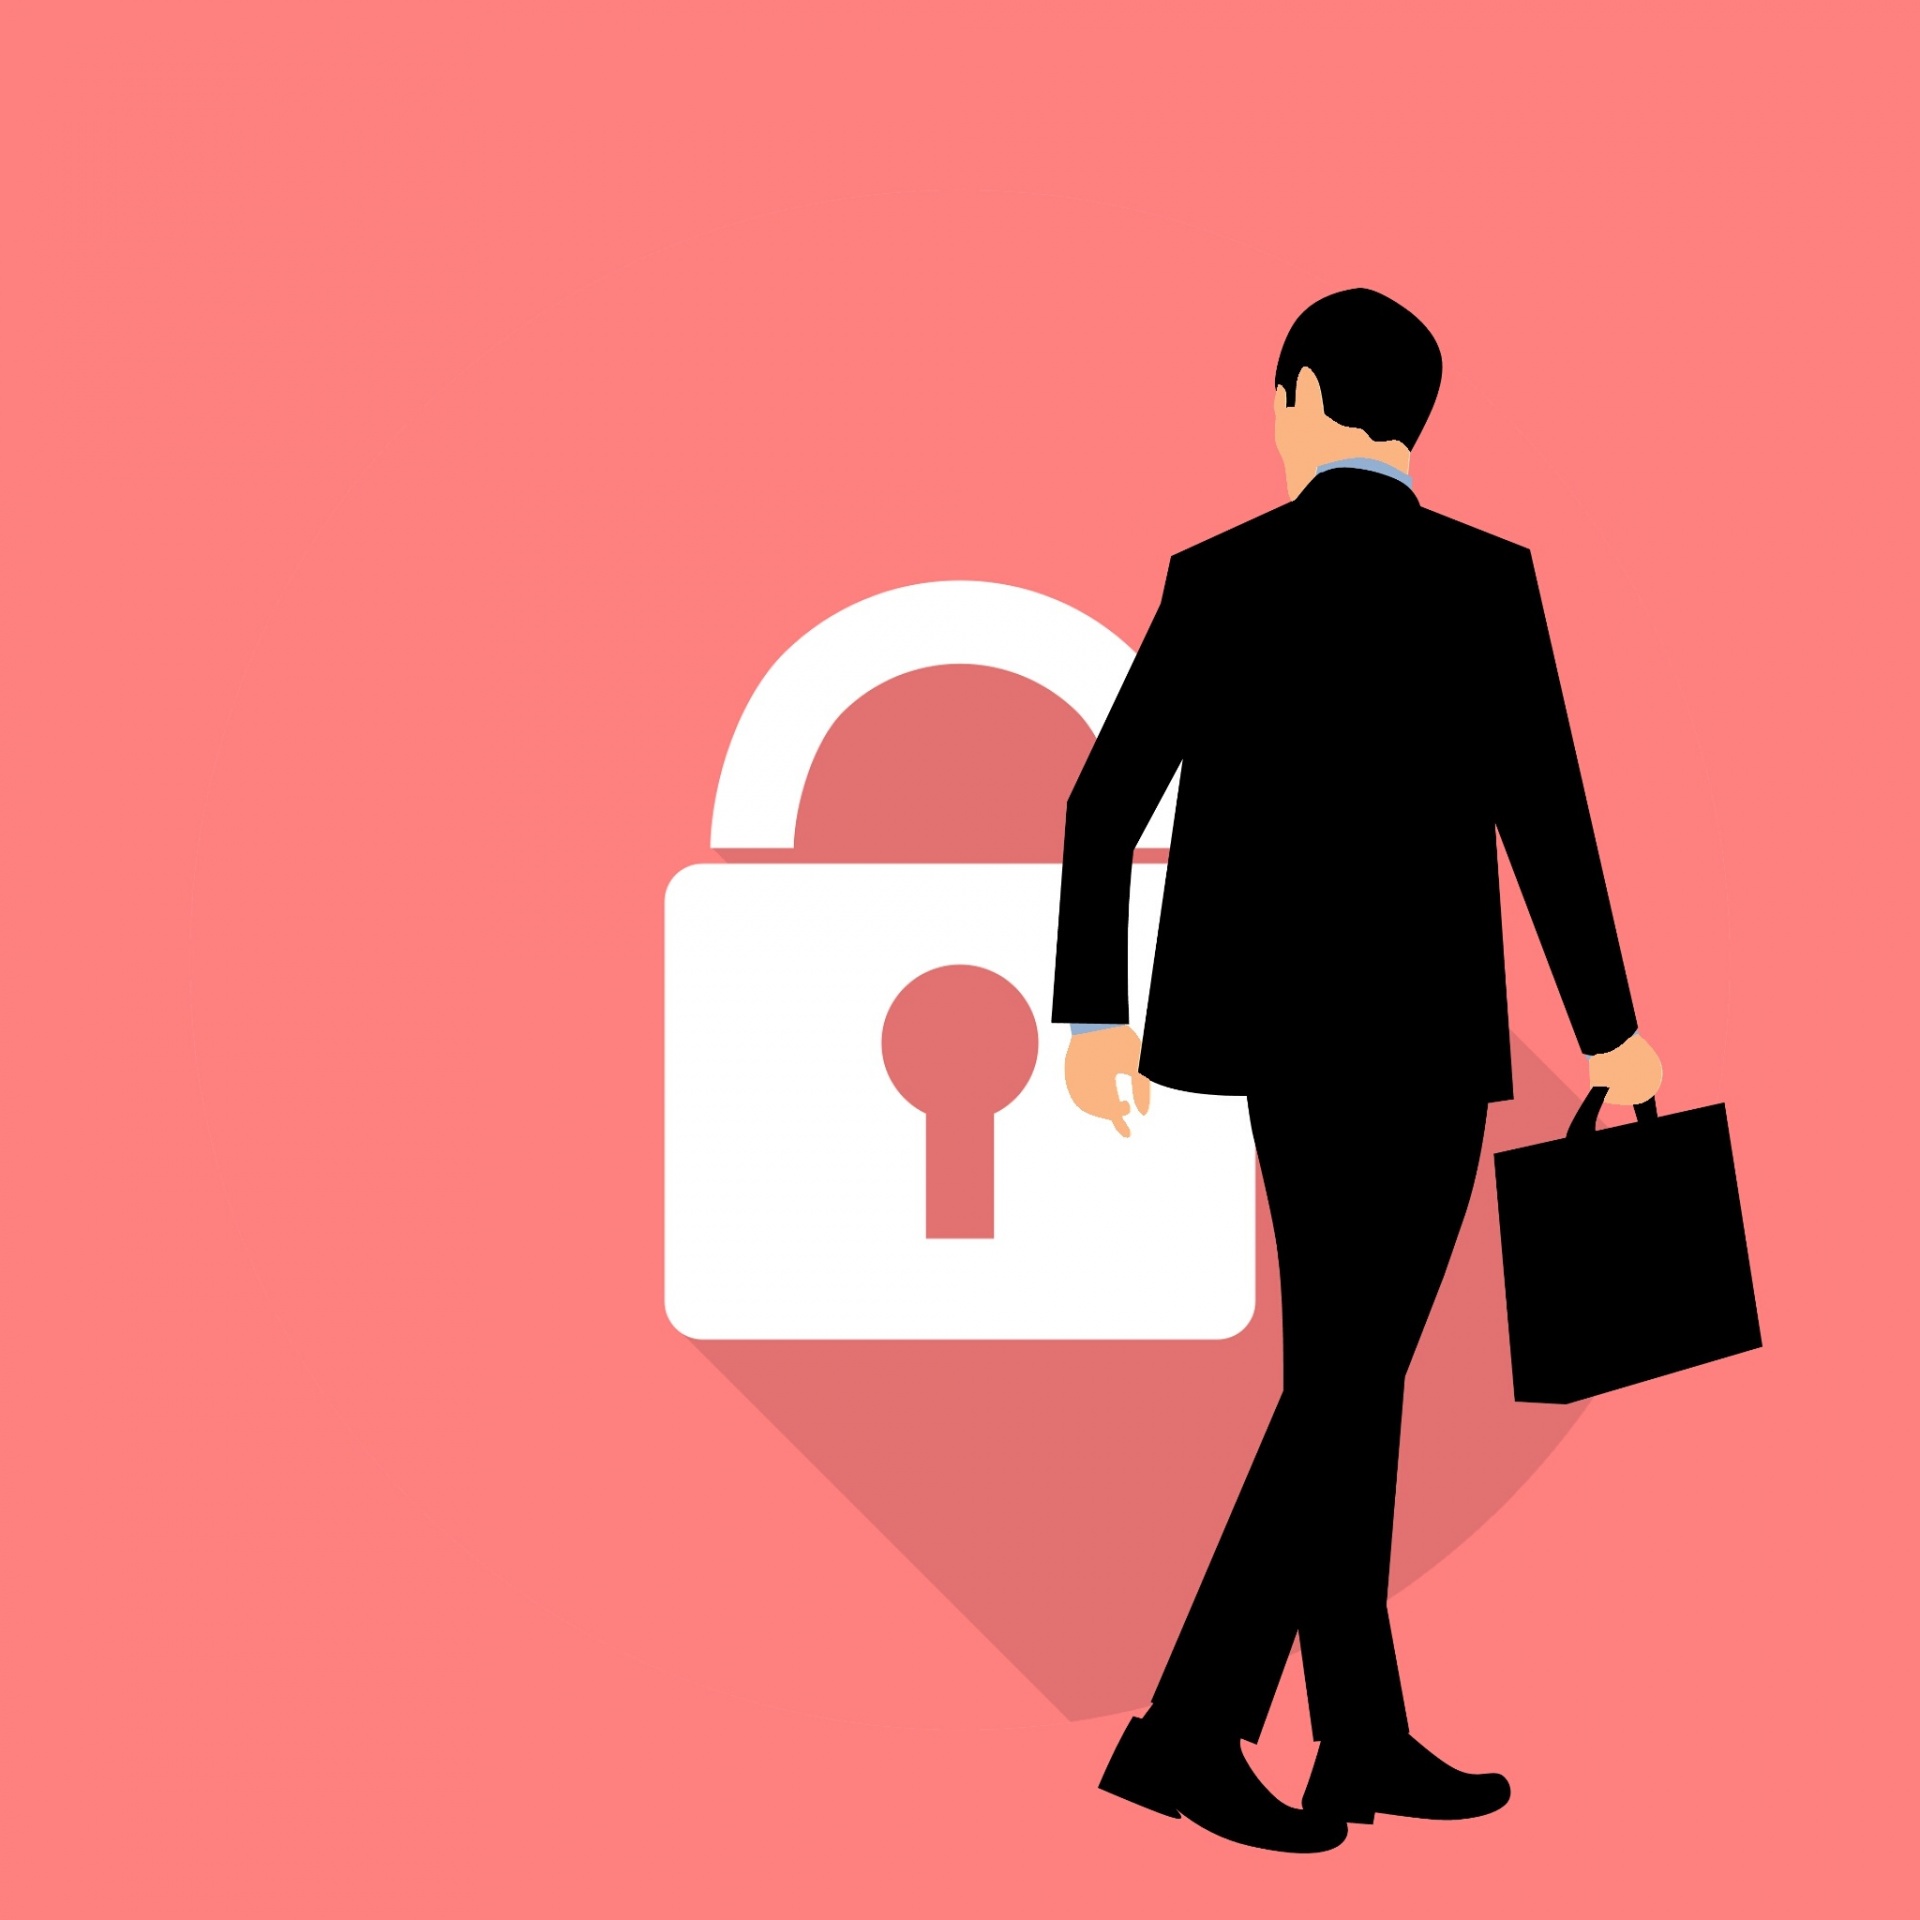 security, privacy, lock icon, padlock, door lock, safety, lock and key, safe, organization, business, back view, isolated, briefcase, full people, side, businessman, length body, suit, suitcase, model, boss, case, forward, guy, hold, look, man